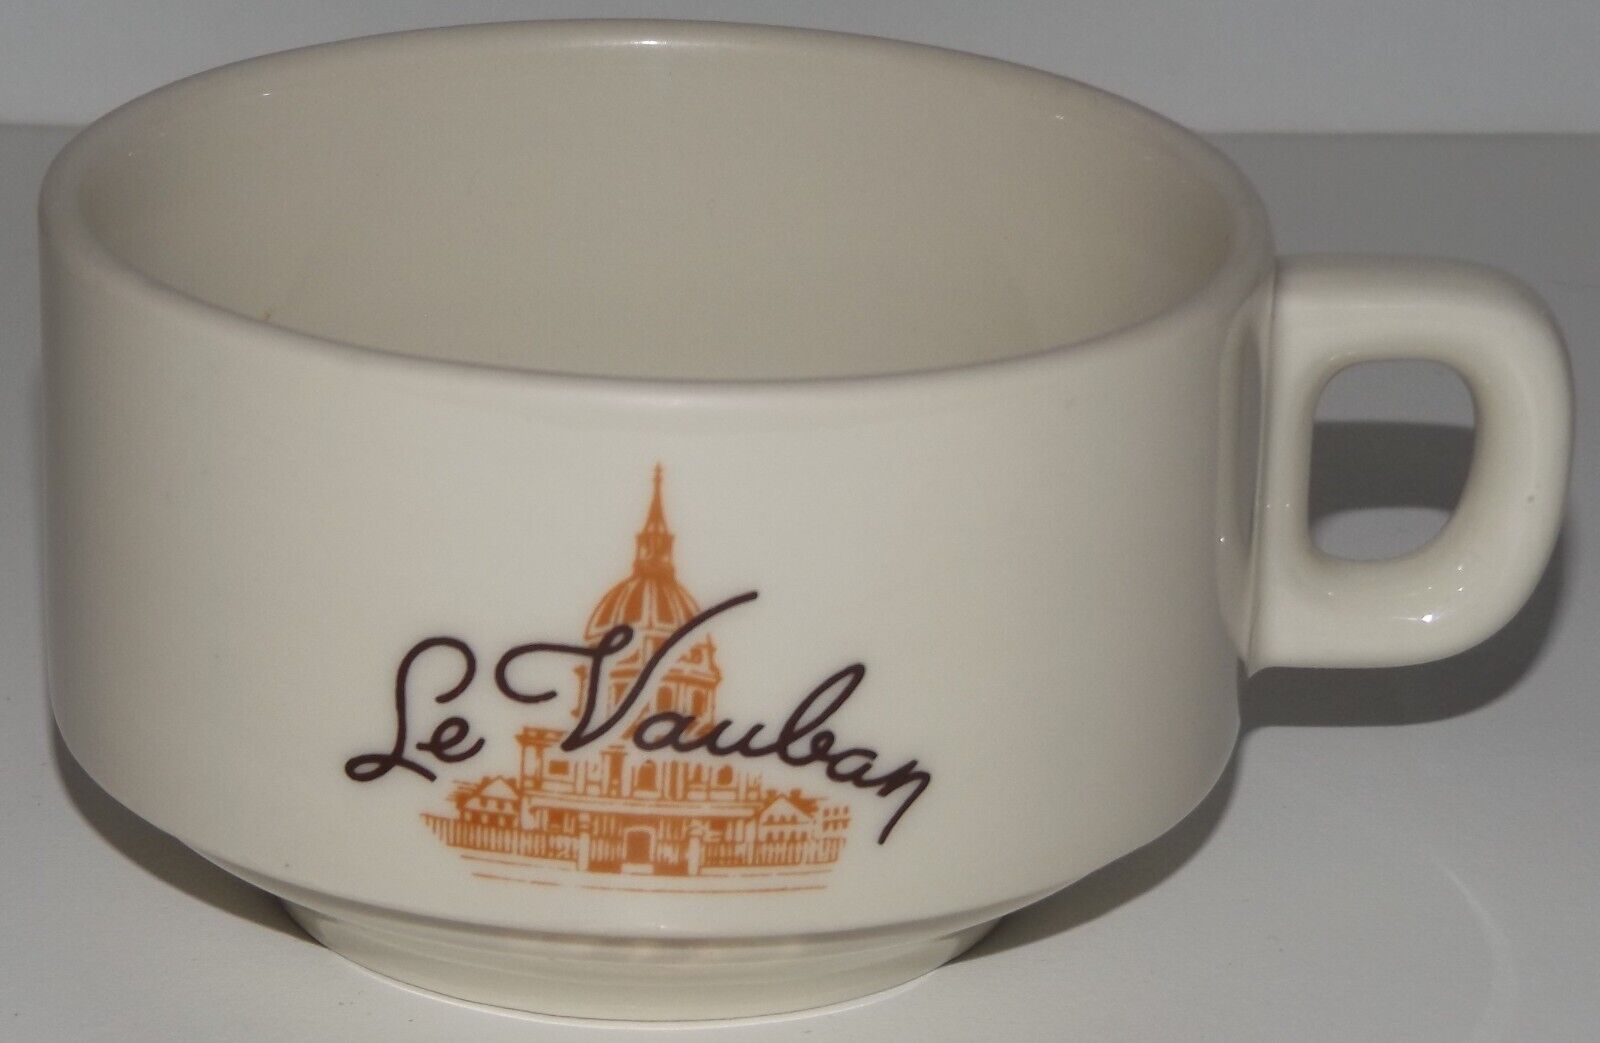 VINTAGE LE VAUBAN COFFEE CUP ACROSS FROM NAPOLEON\'S TOMB IN THE HEART of PARIS